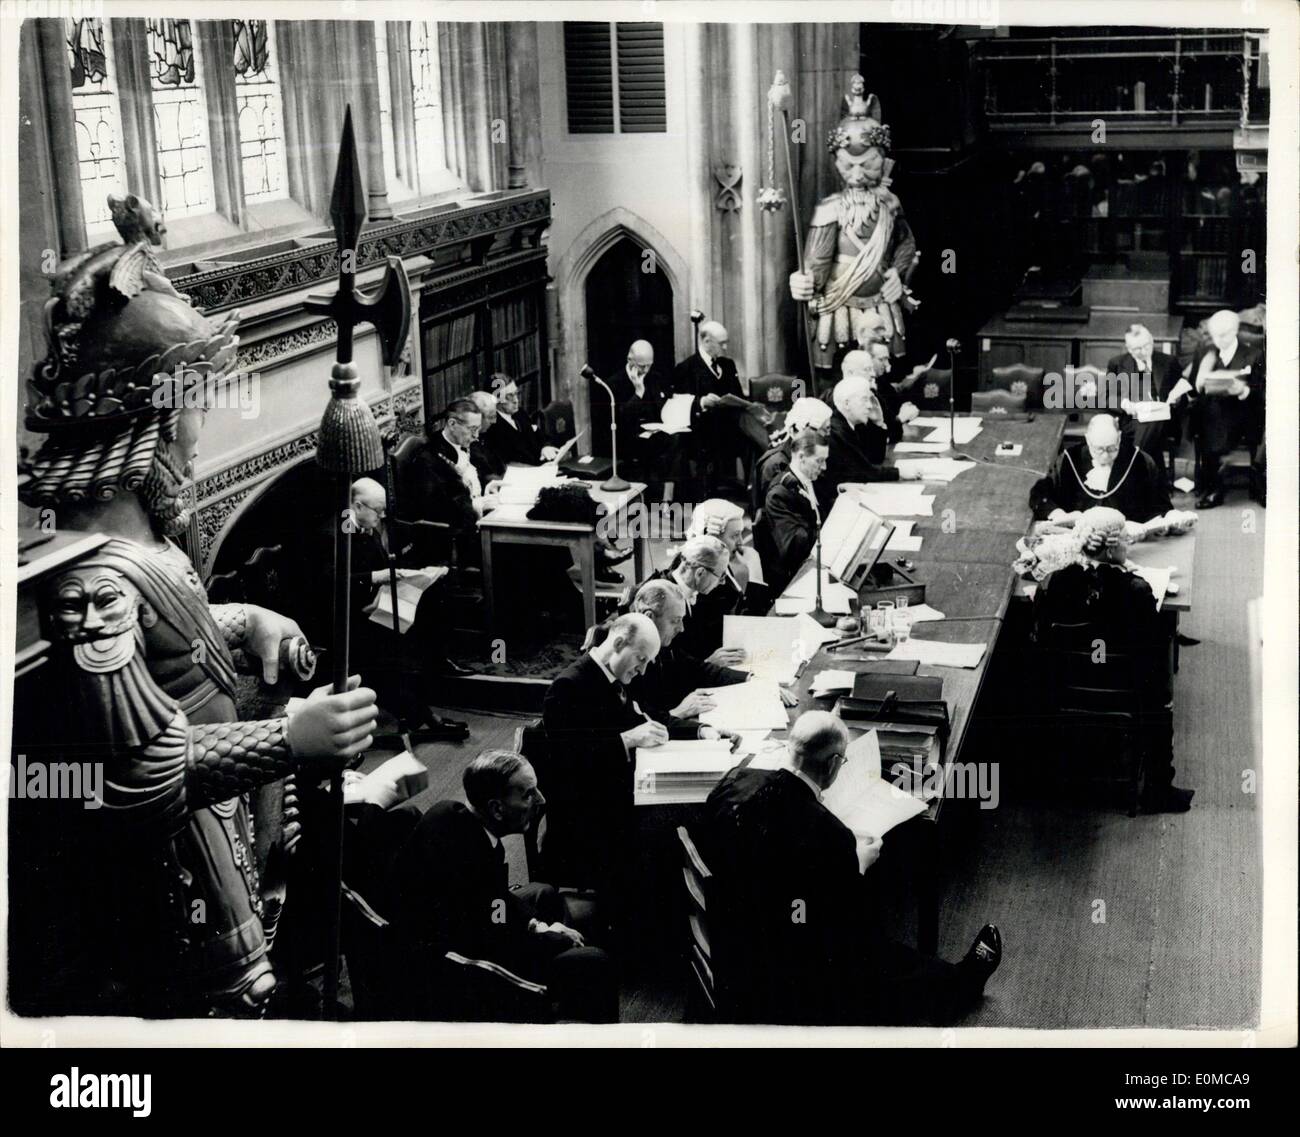 Jun. 18, 1954 - Rejected City Alderman Fights to Get New Hearing - Photo Shows:- Inside London's Guildhall Gog (left) and Magog Stock Photo